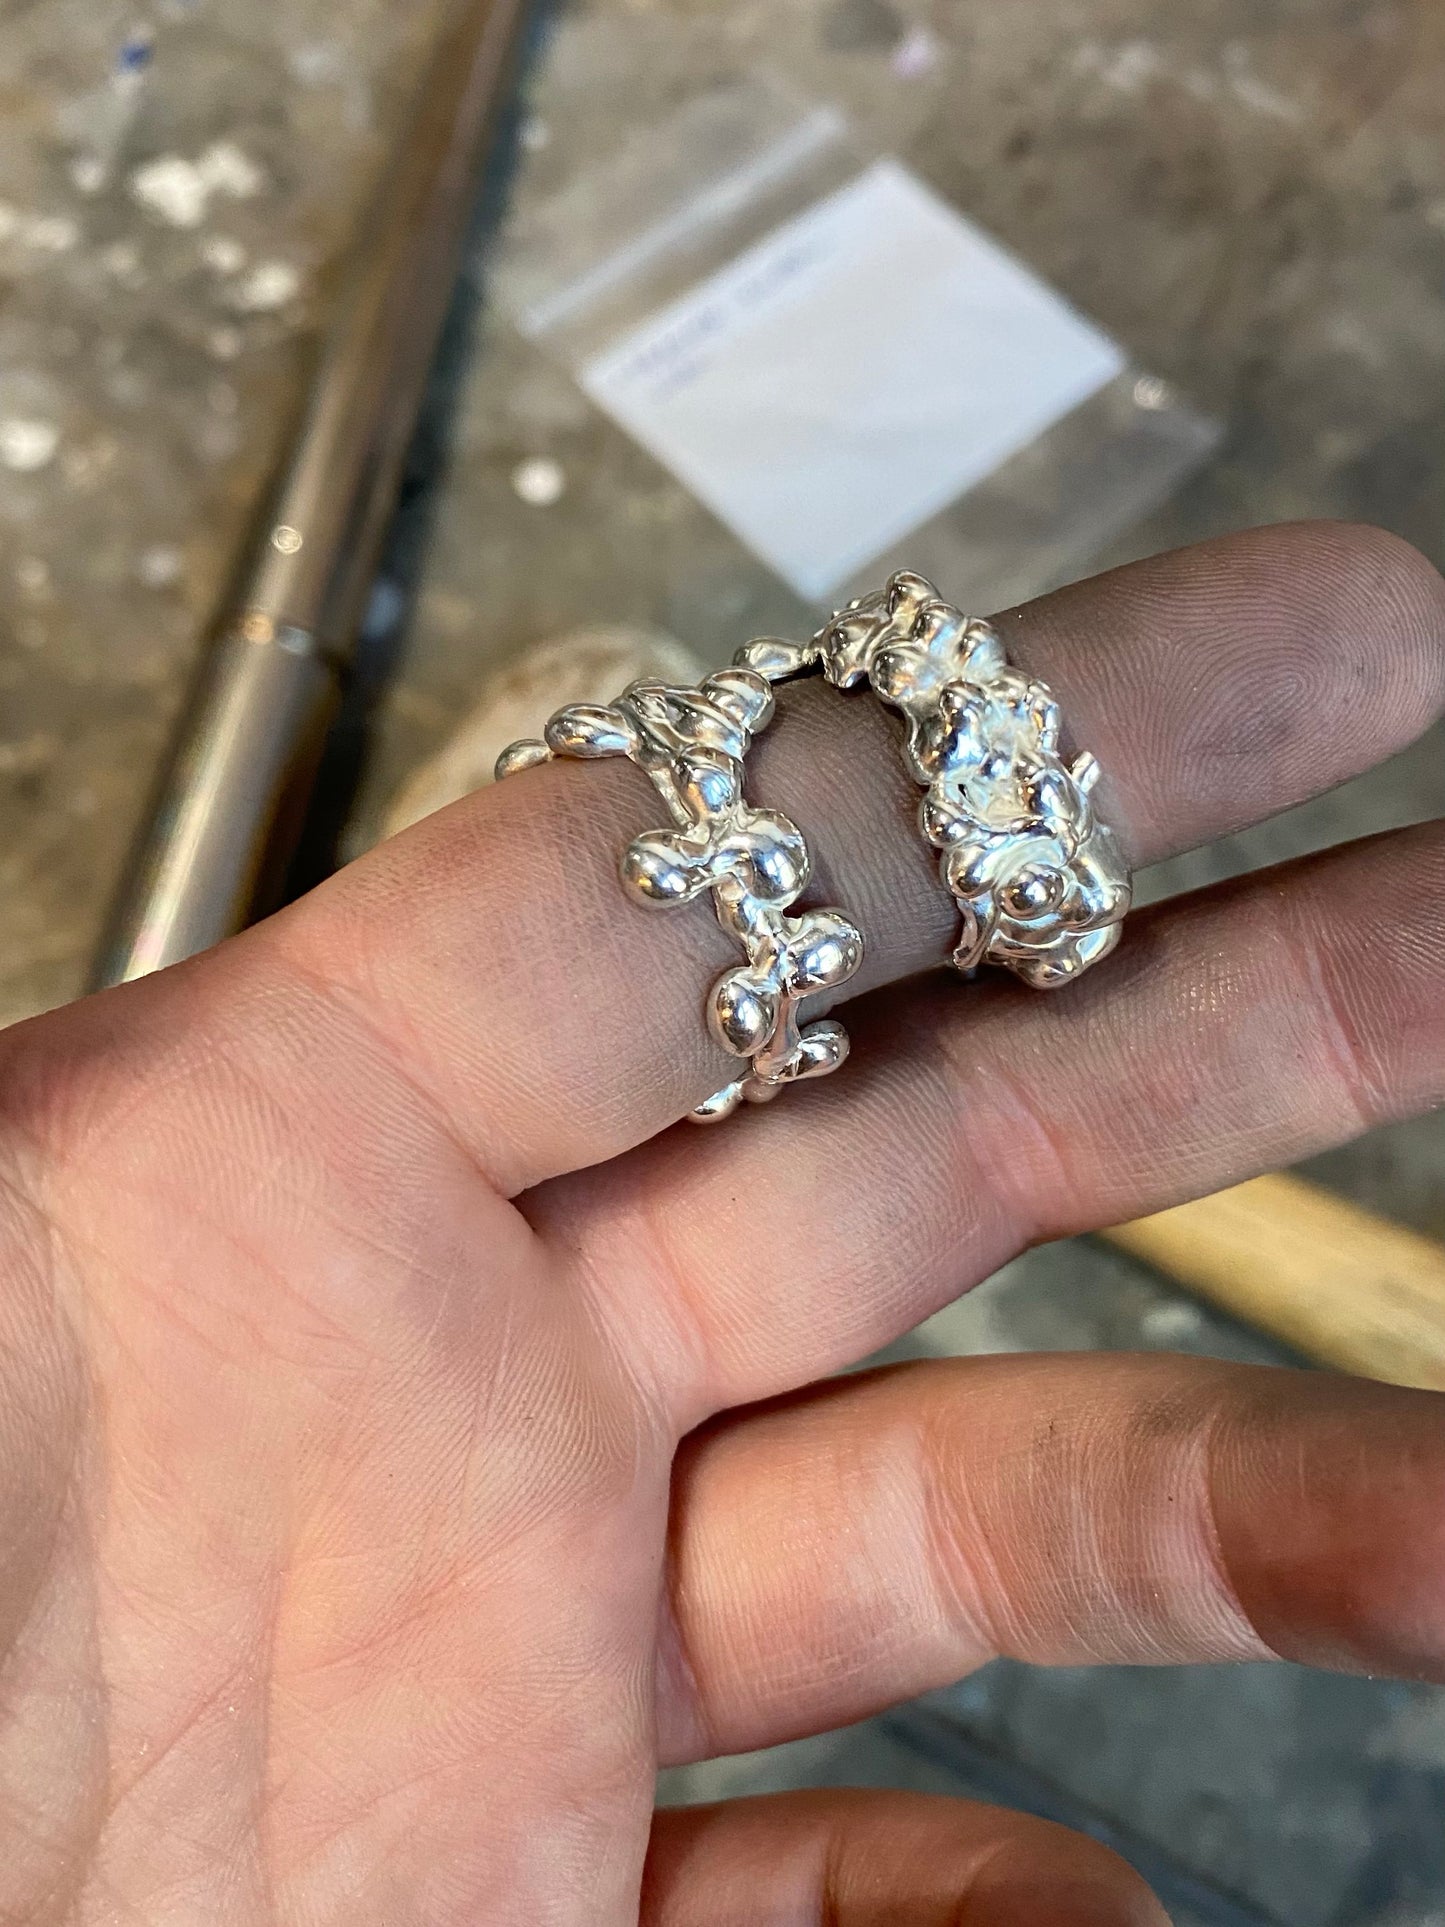 Two molten silver rings on hand in front of goldsmith tools